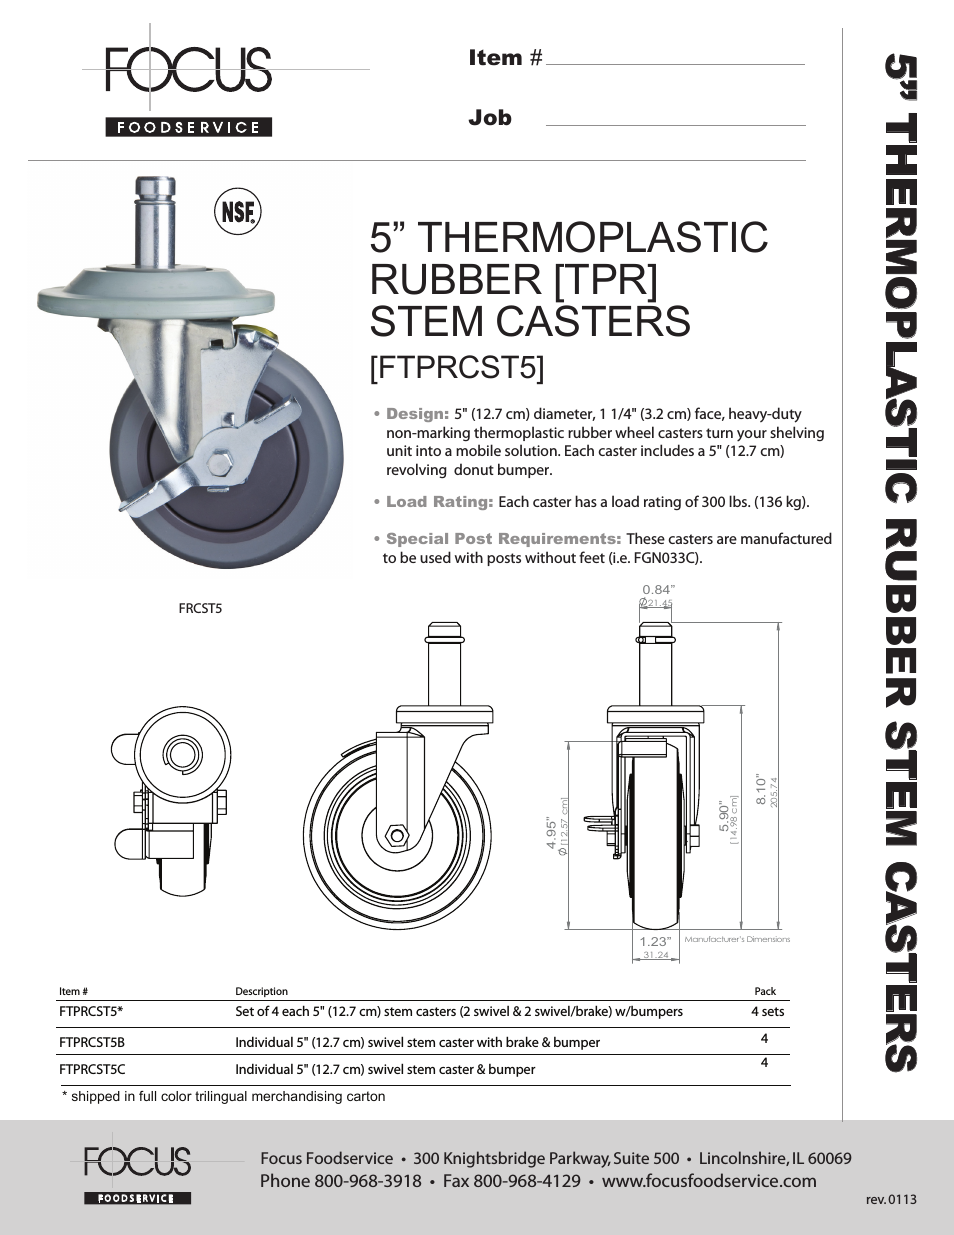 FTPRCST5 5” THERMOPLASTIC RUBBER [TPR] STEM CASTERS - Specification Sheets